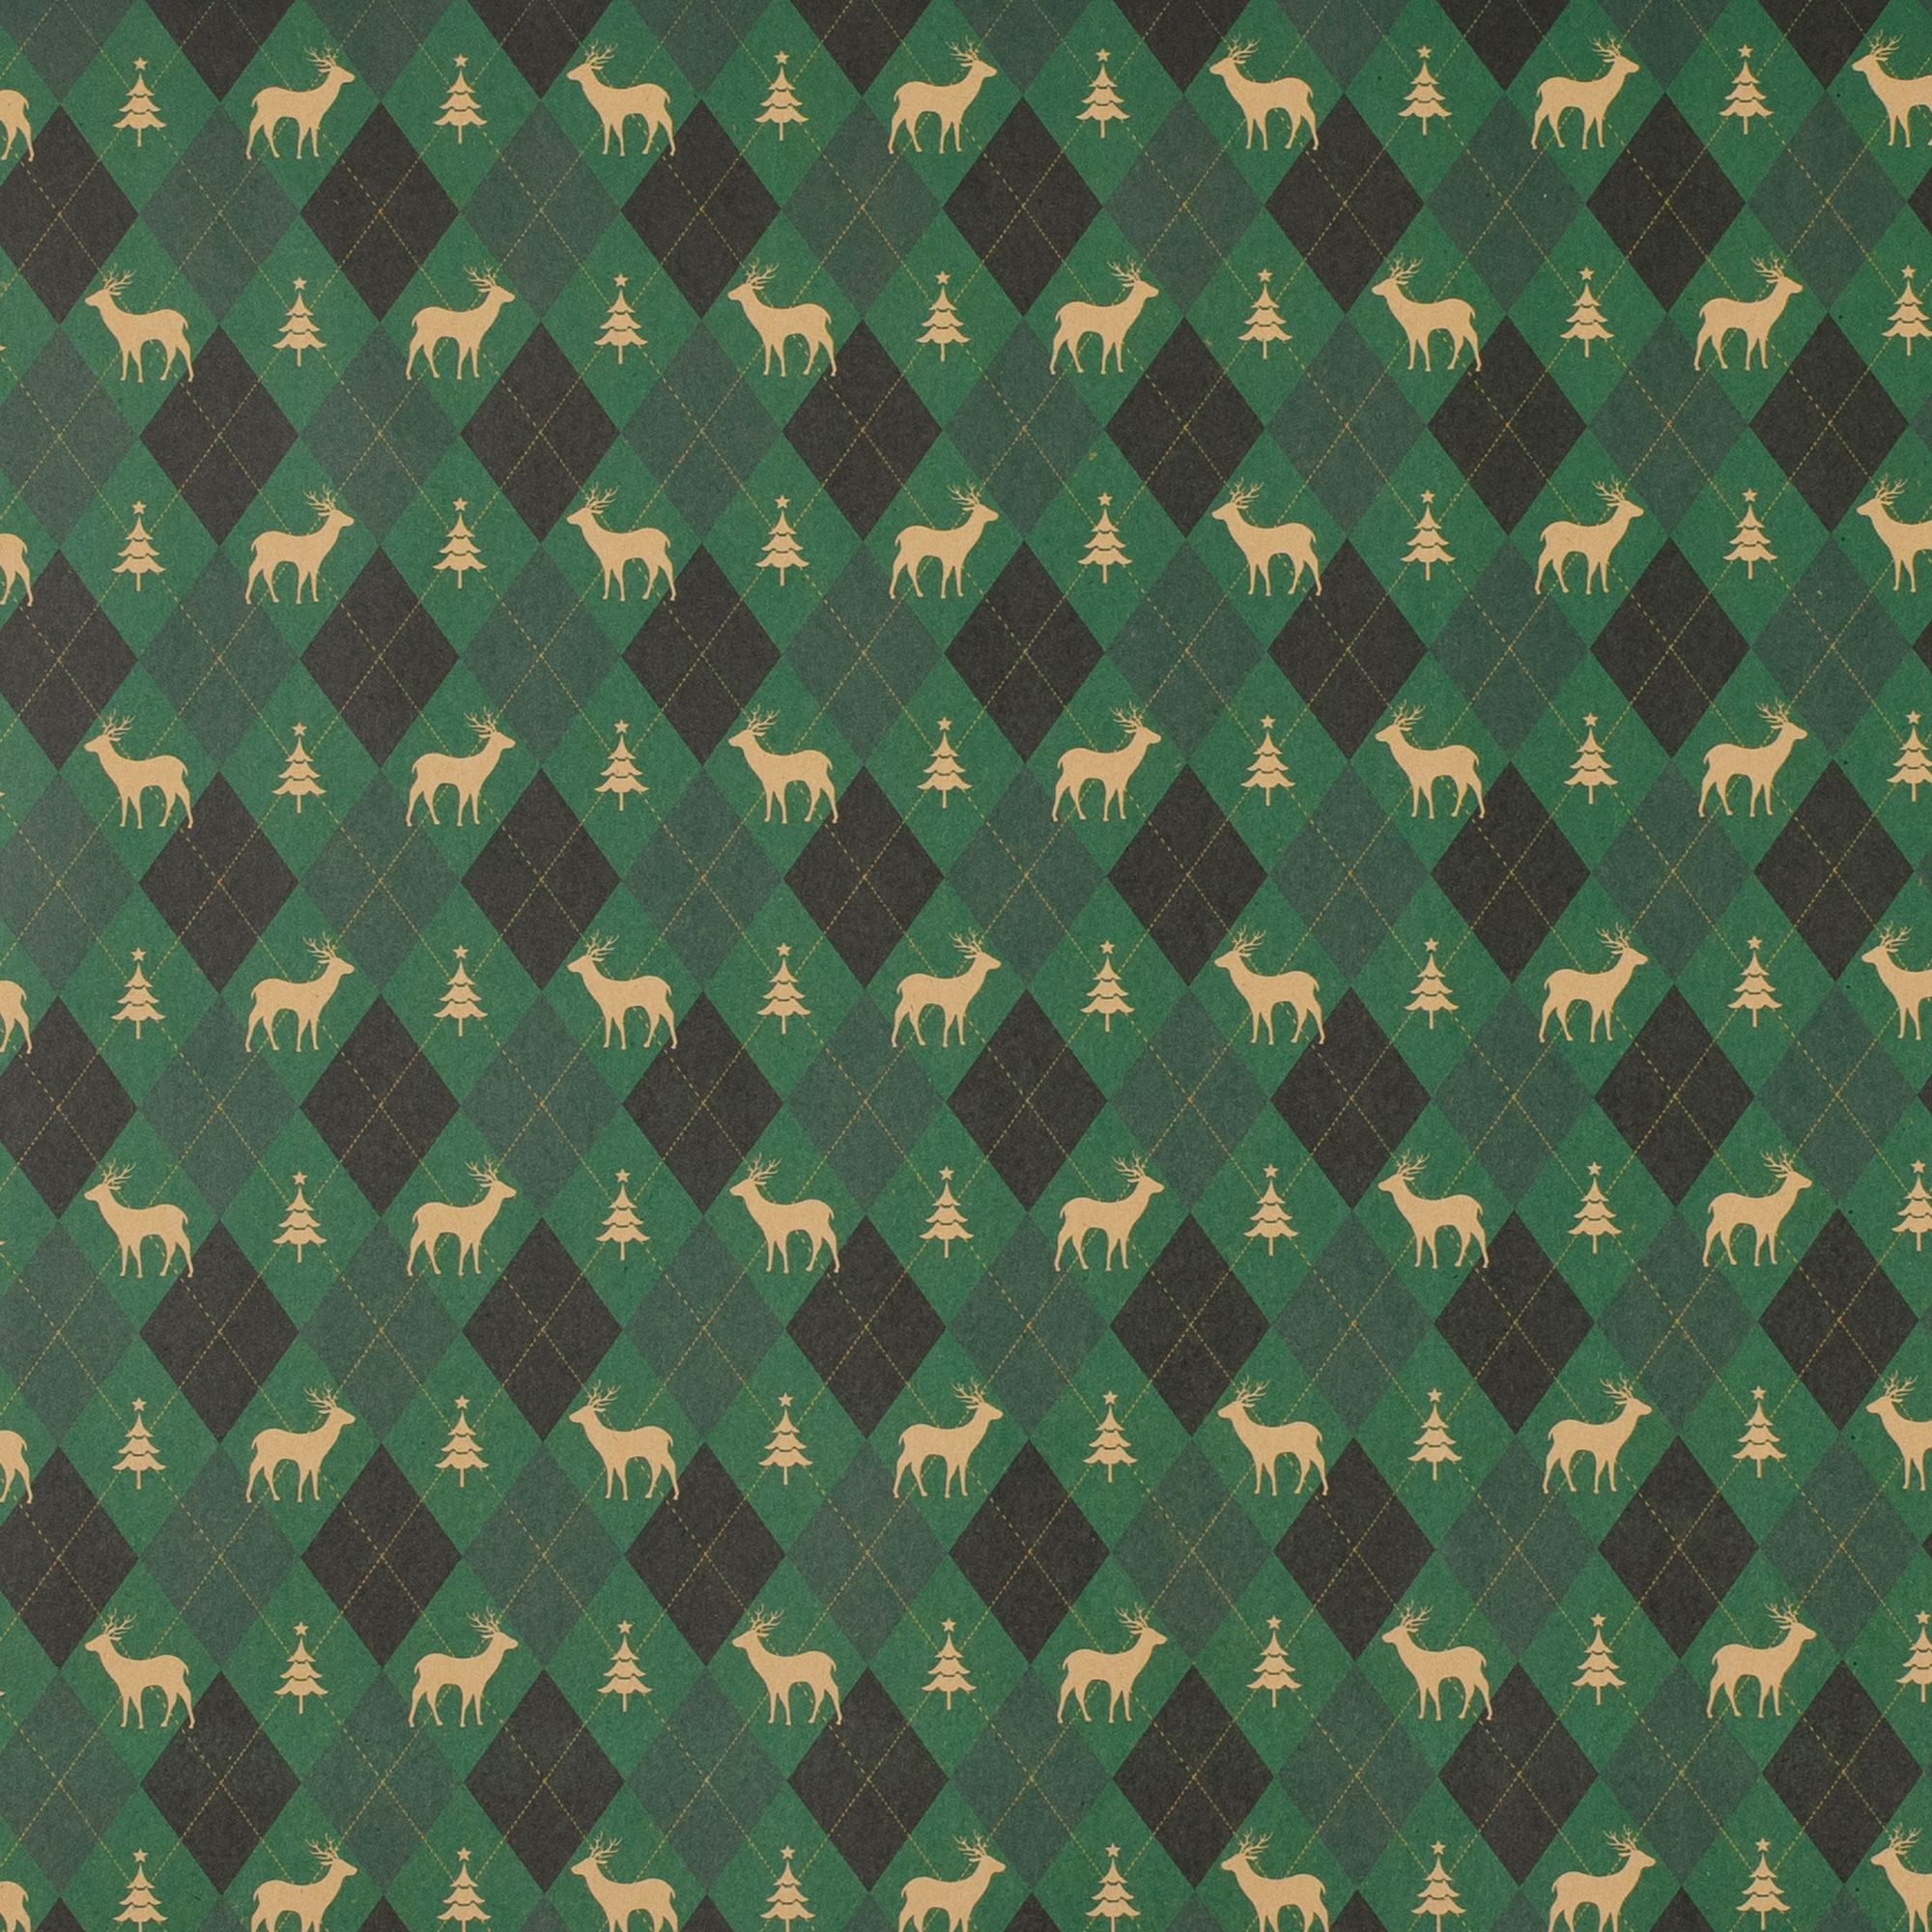 Weikeyi Christmas Wrapping Paper_Green Grid Elk